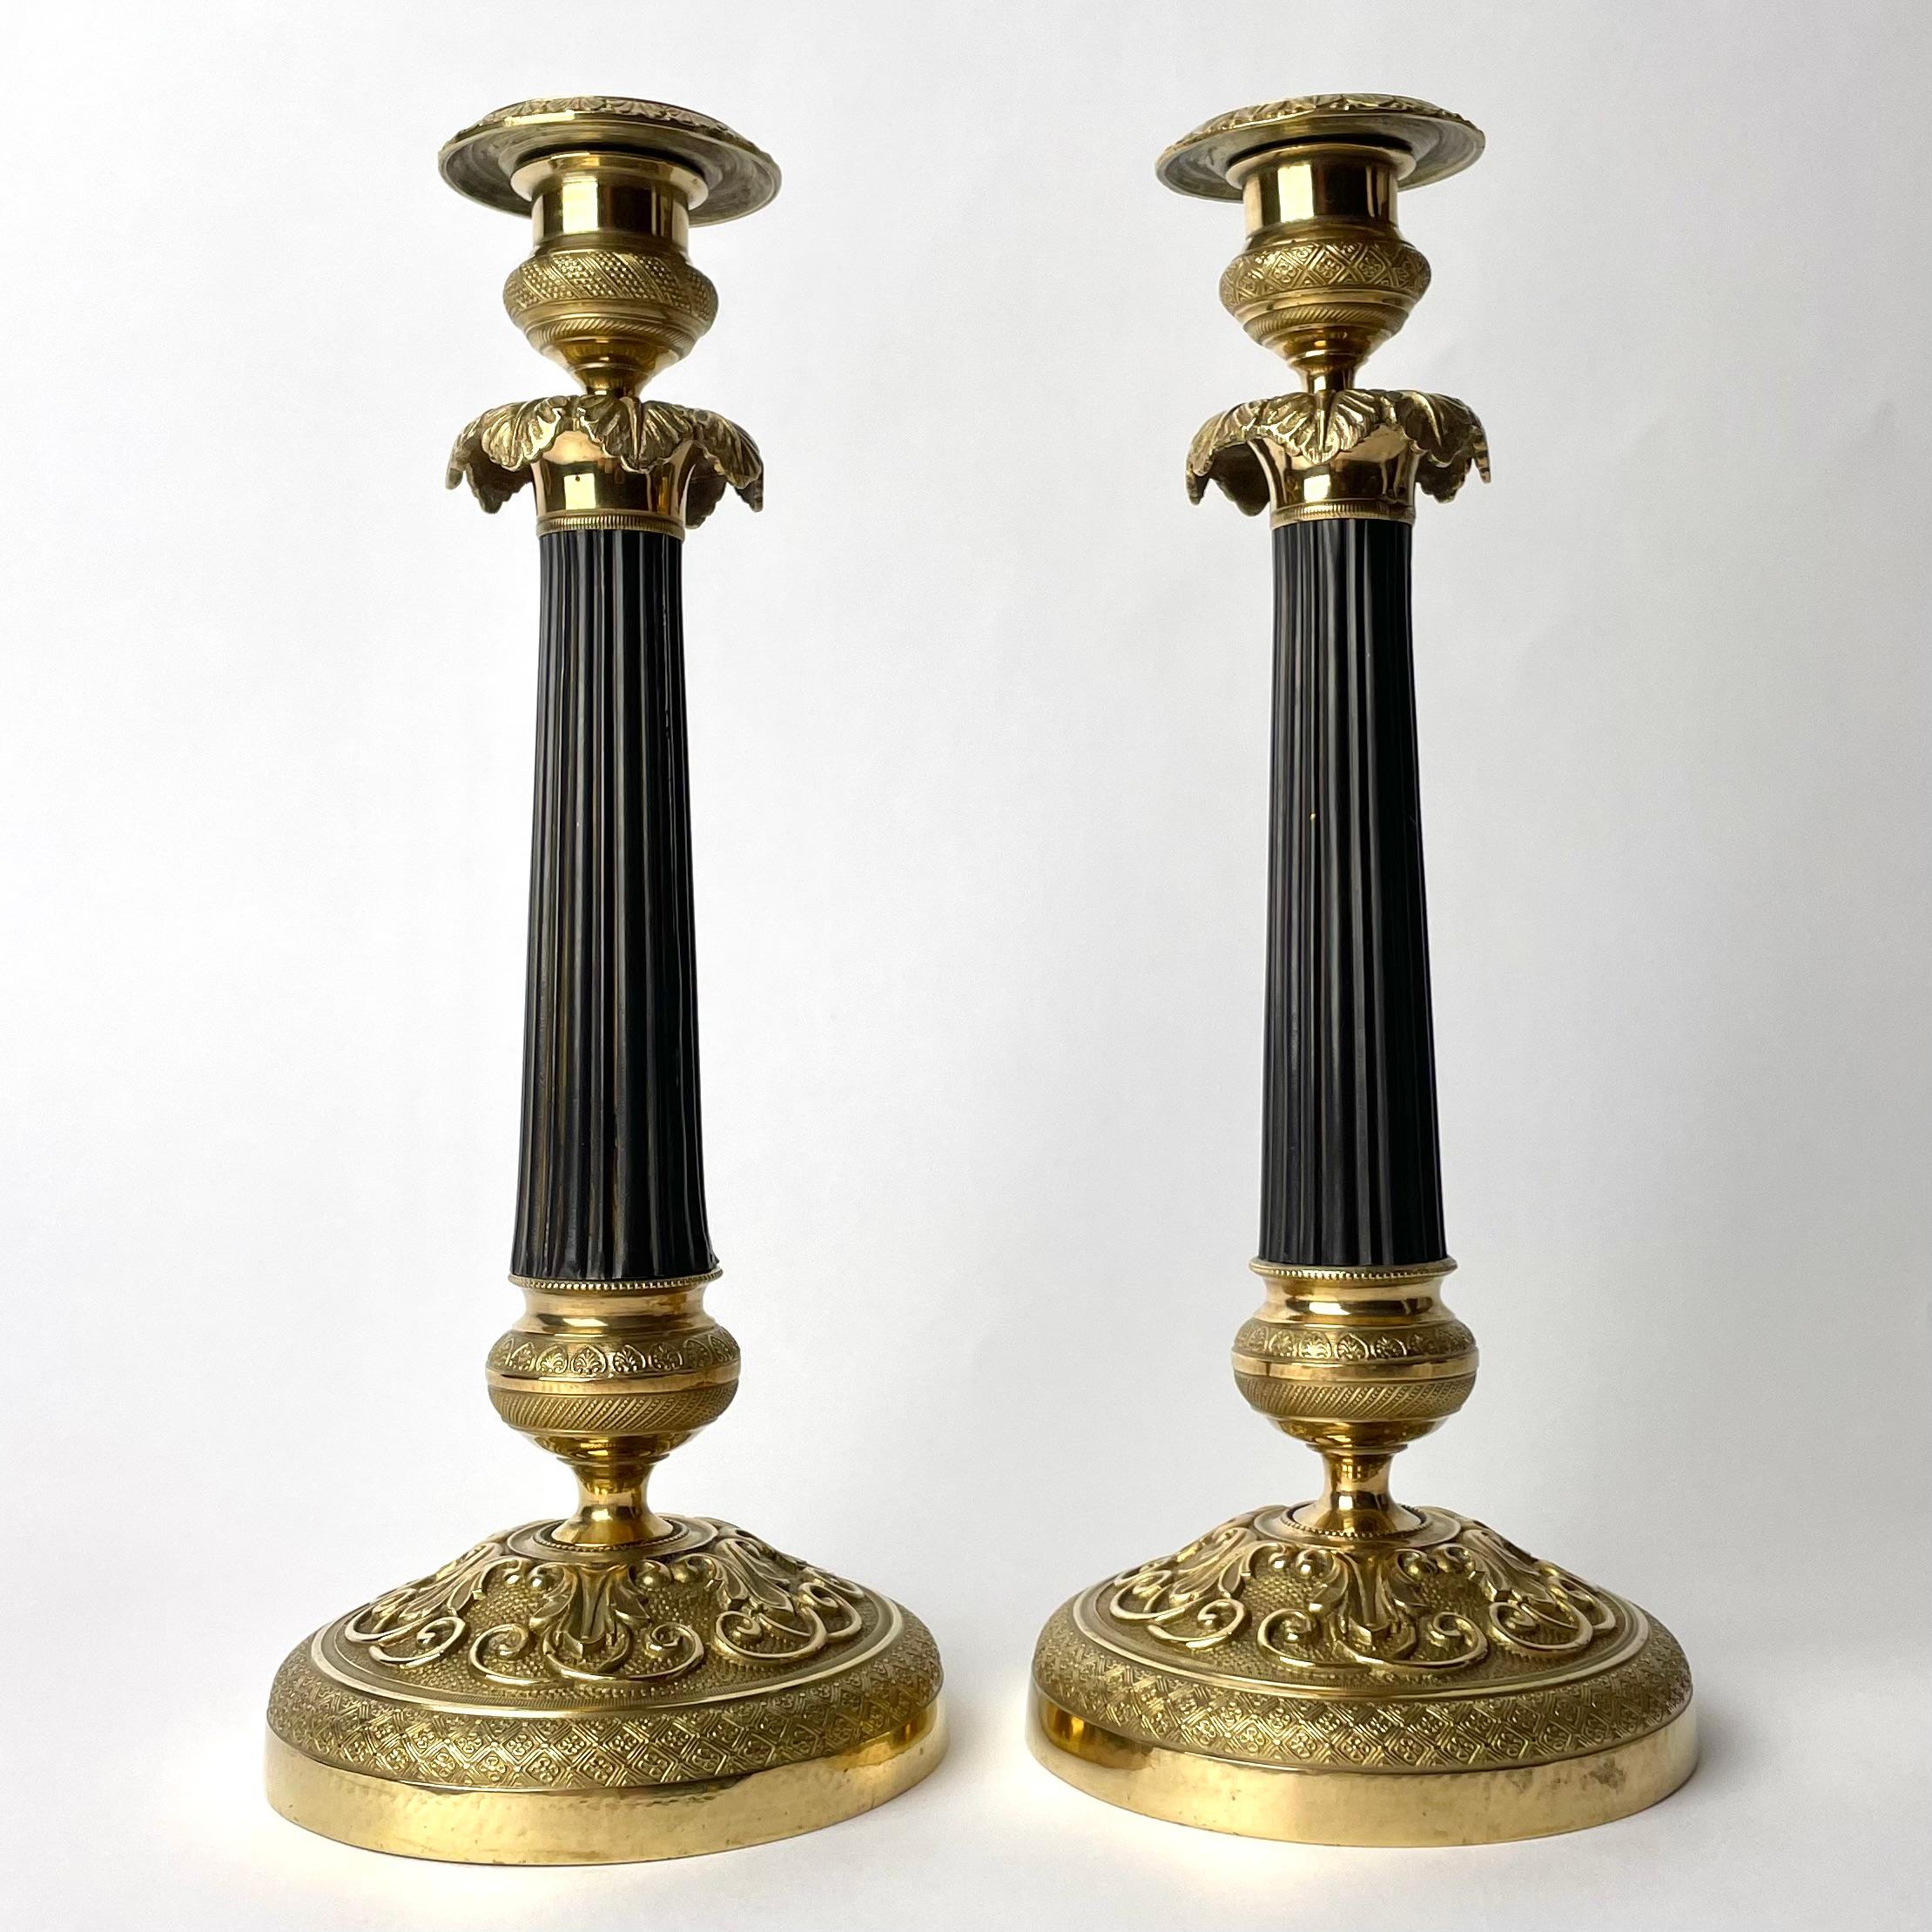  A beautiful Pair of Empire Candlesticks in gilded and darkpatinated bronze. Made in France during the 1820s. Richly decorated with leaves and other period ornaments as well as a dark patinated column in the center of the candlestick.

Wear